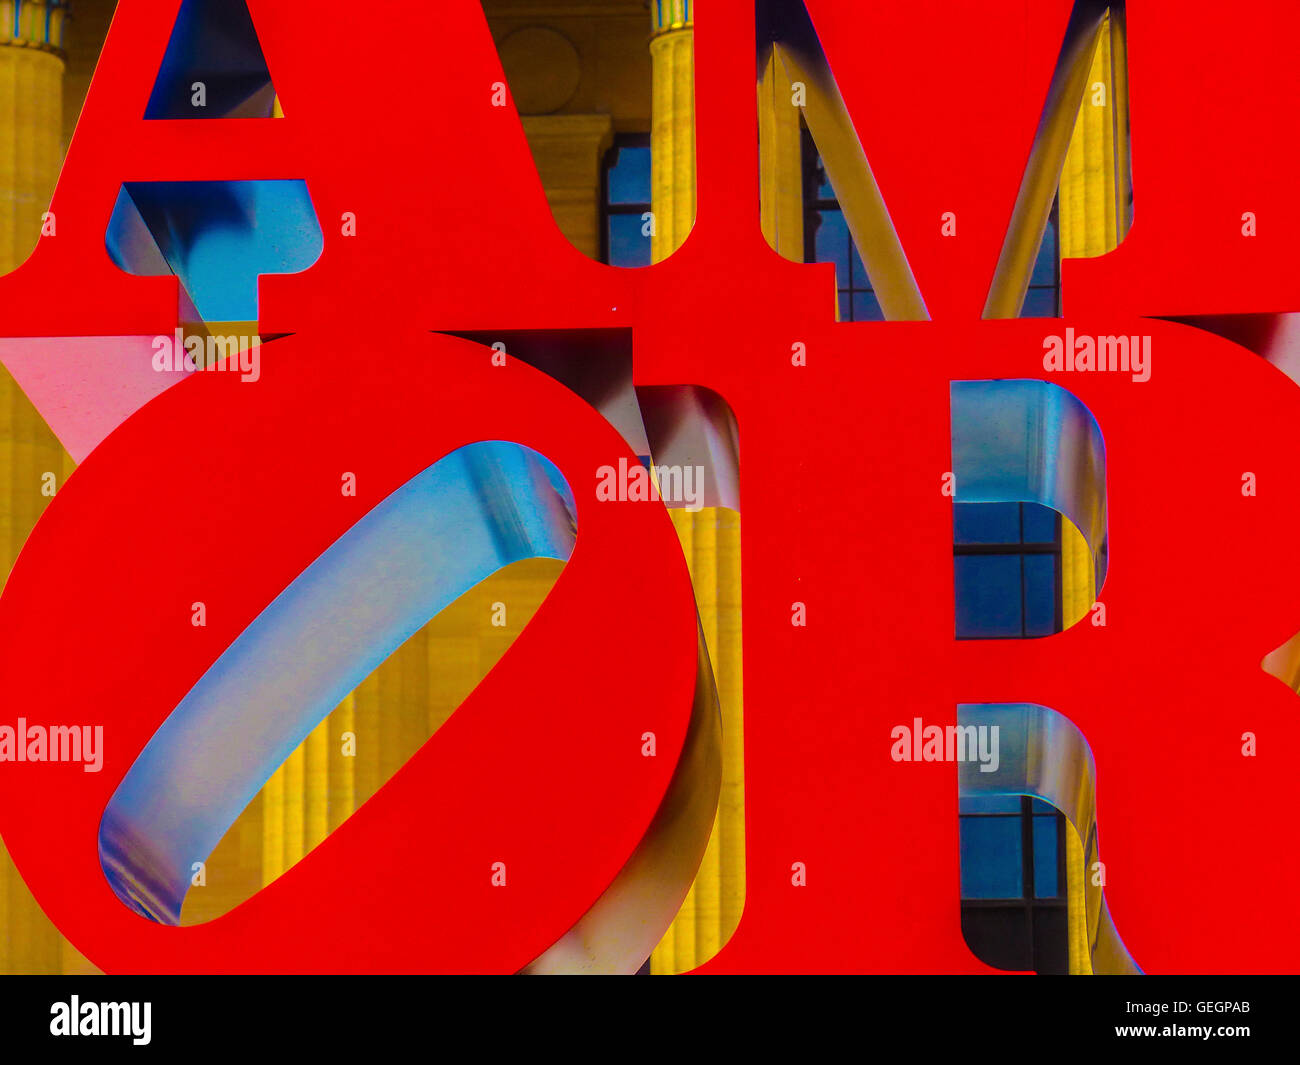 Oversized red letters forming design sculpture Philadelphia, Pa Stock Photo